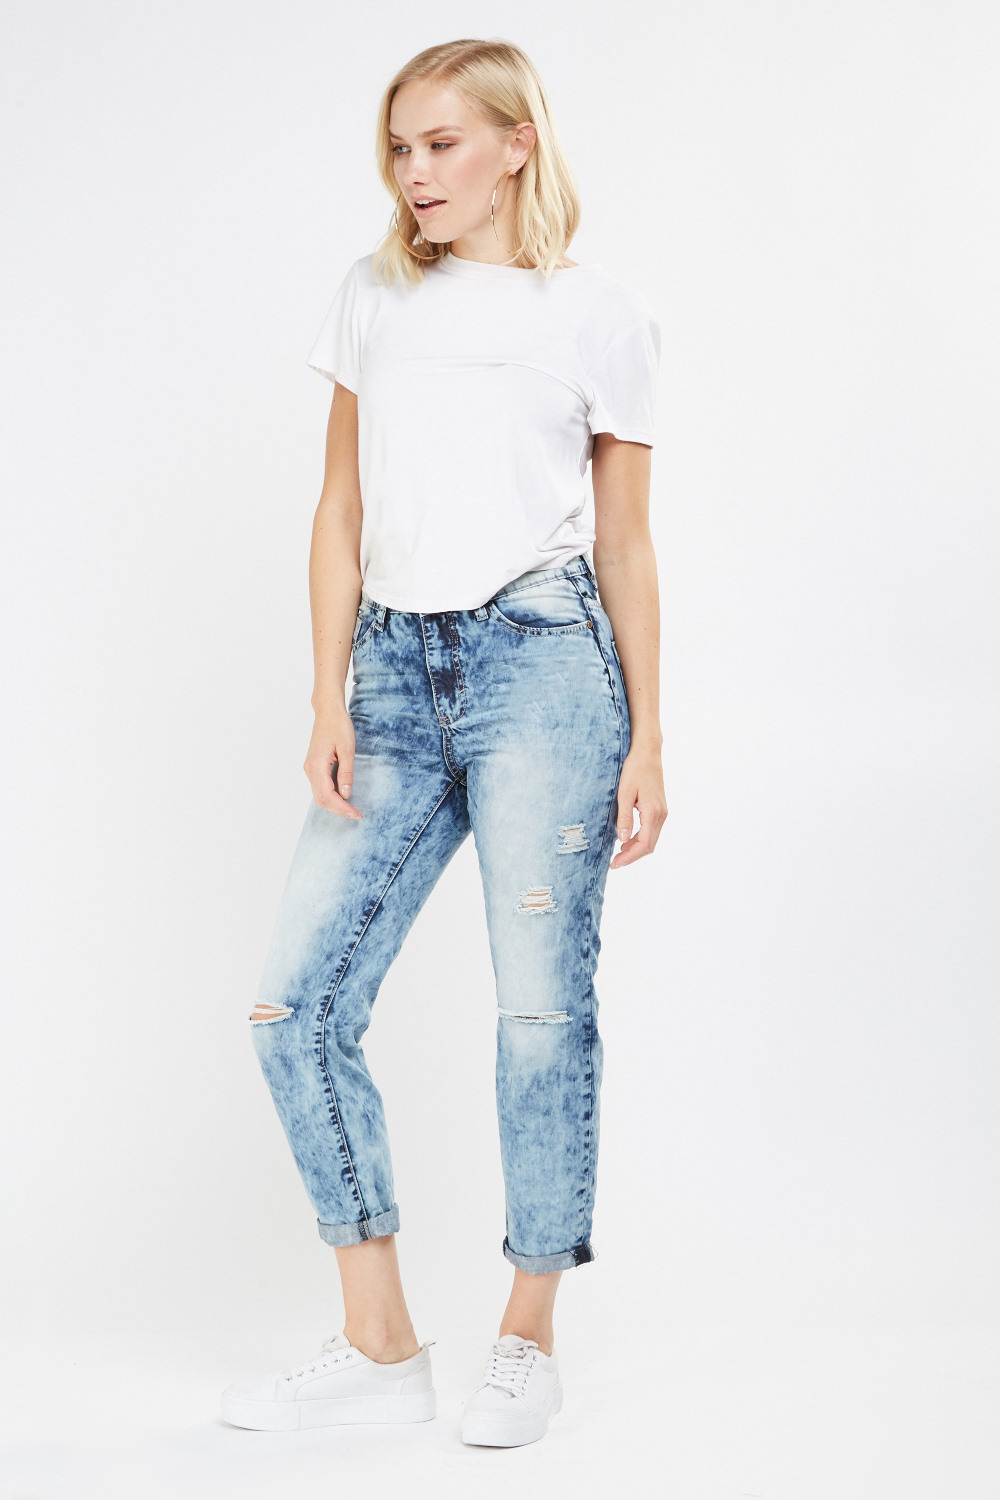 Washed Out Frayed Denim Jeans - Just $7